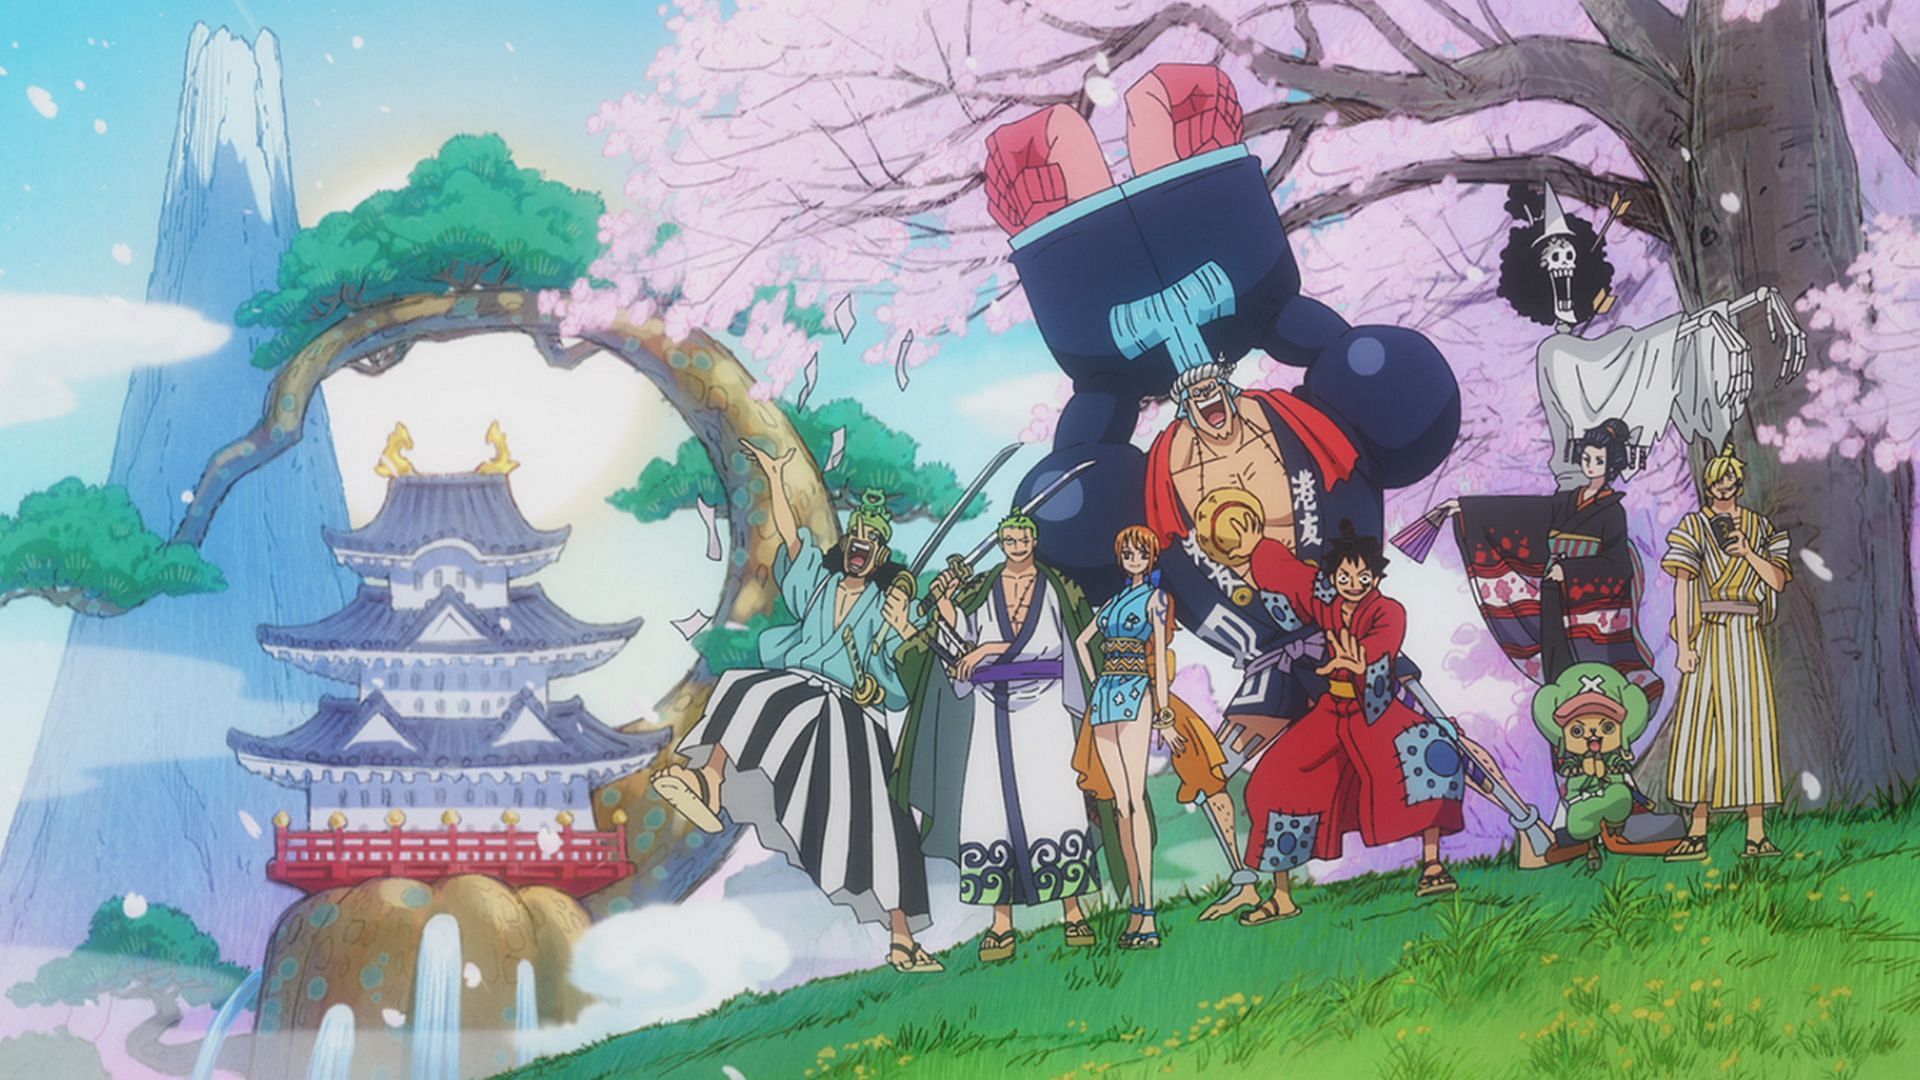 The Straw Hat crew minus Jinbe, as seen in the first opening of the One Piece anime&#039;s Wano arc. (Image via Toei Animation)